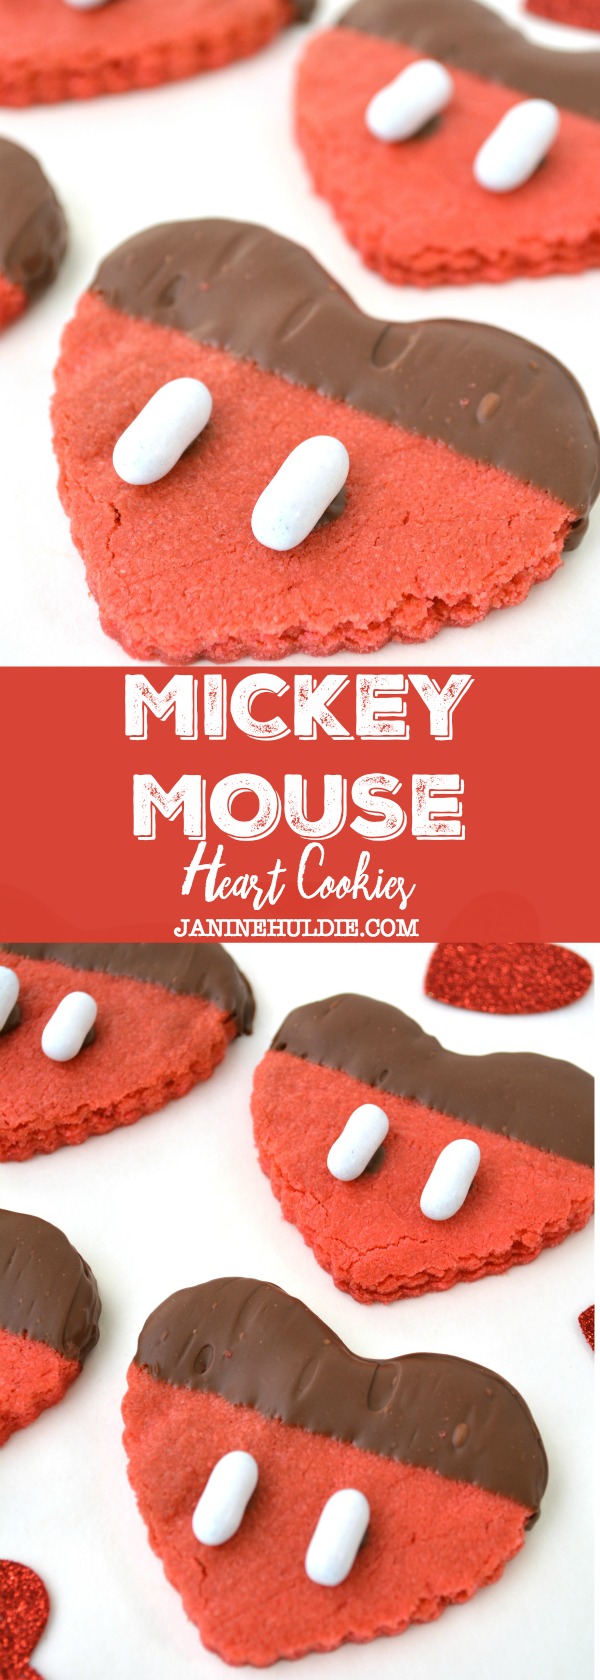 Mickey Mouse Heart Cookies